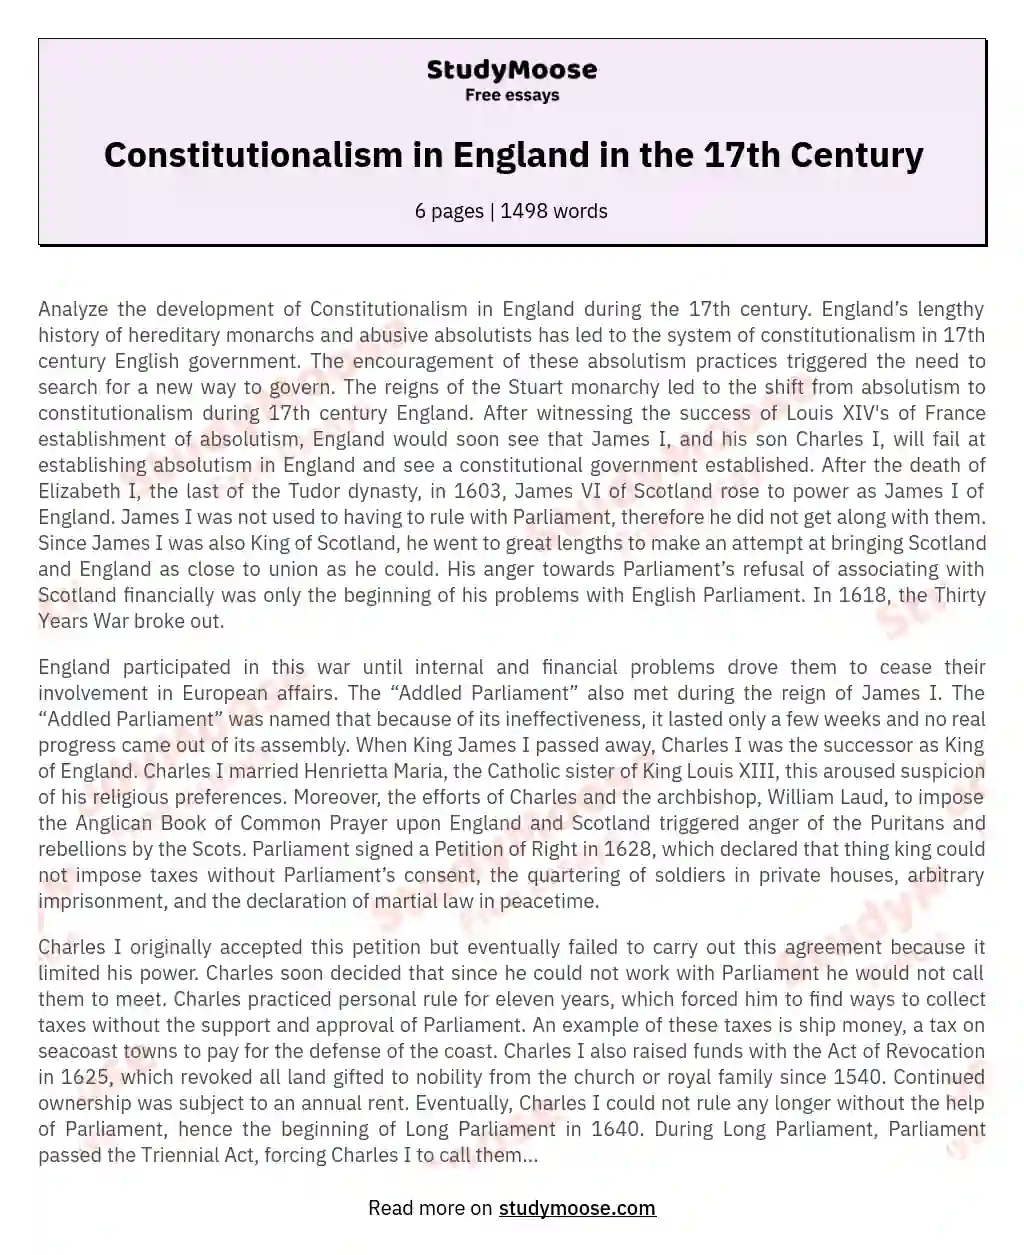 Constitutionalism in England in the 17th Century